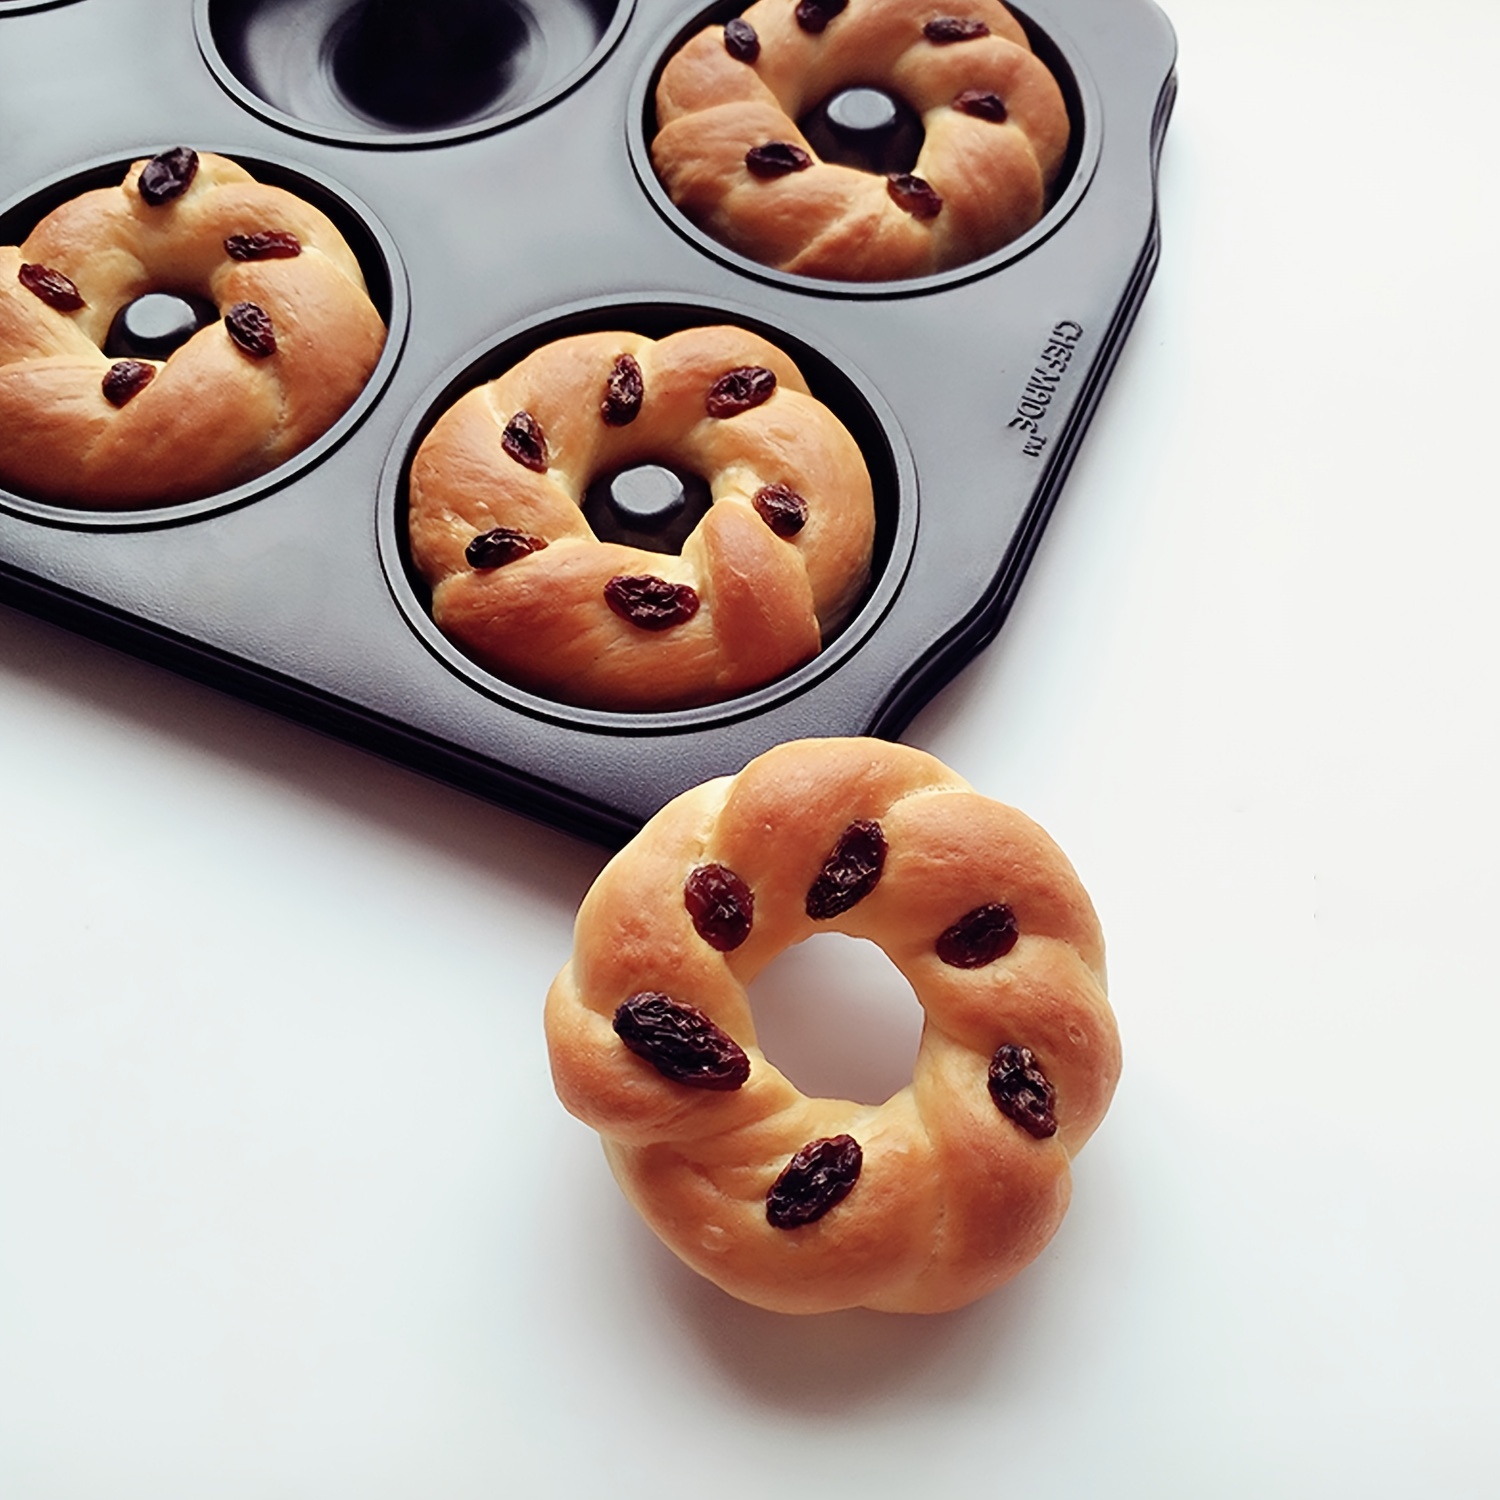 Mini Donut Cake Pan 12 Well 2Pcs (Black) - CHEFMADE official store